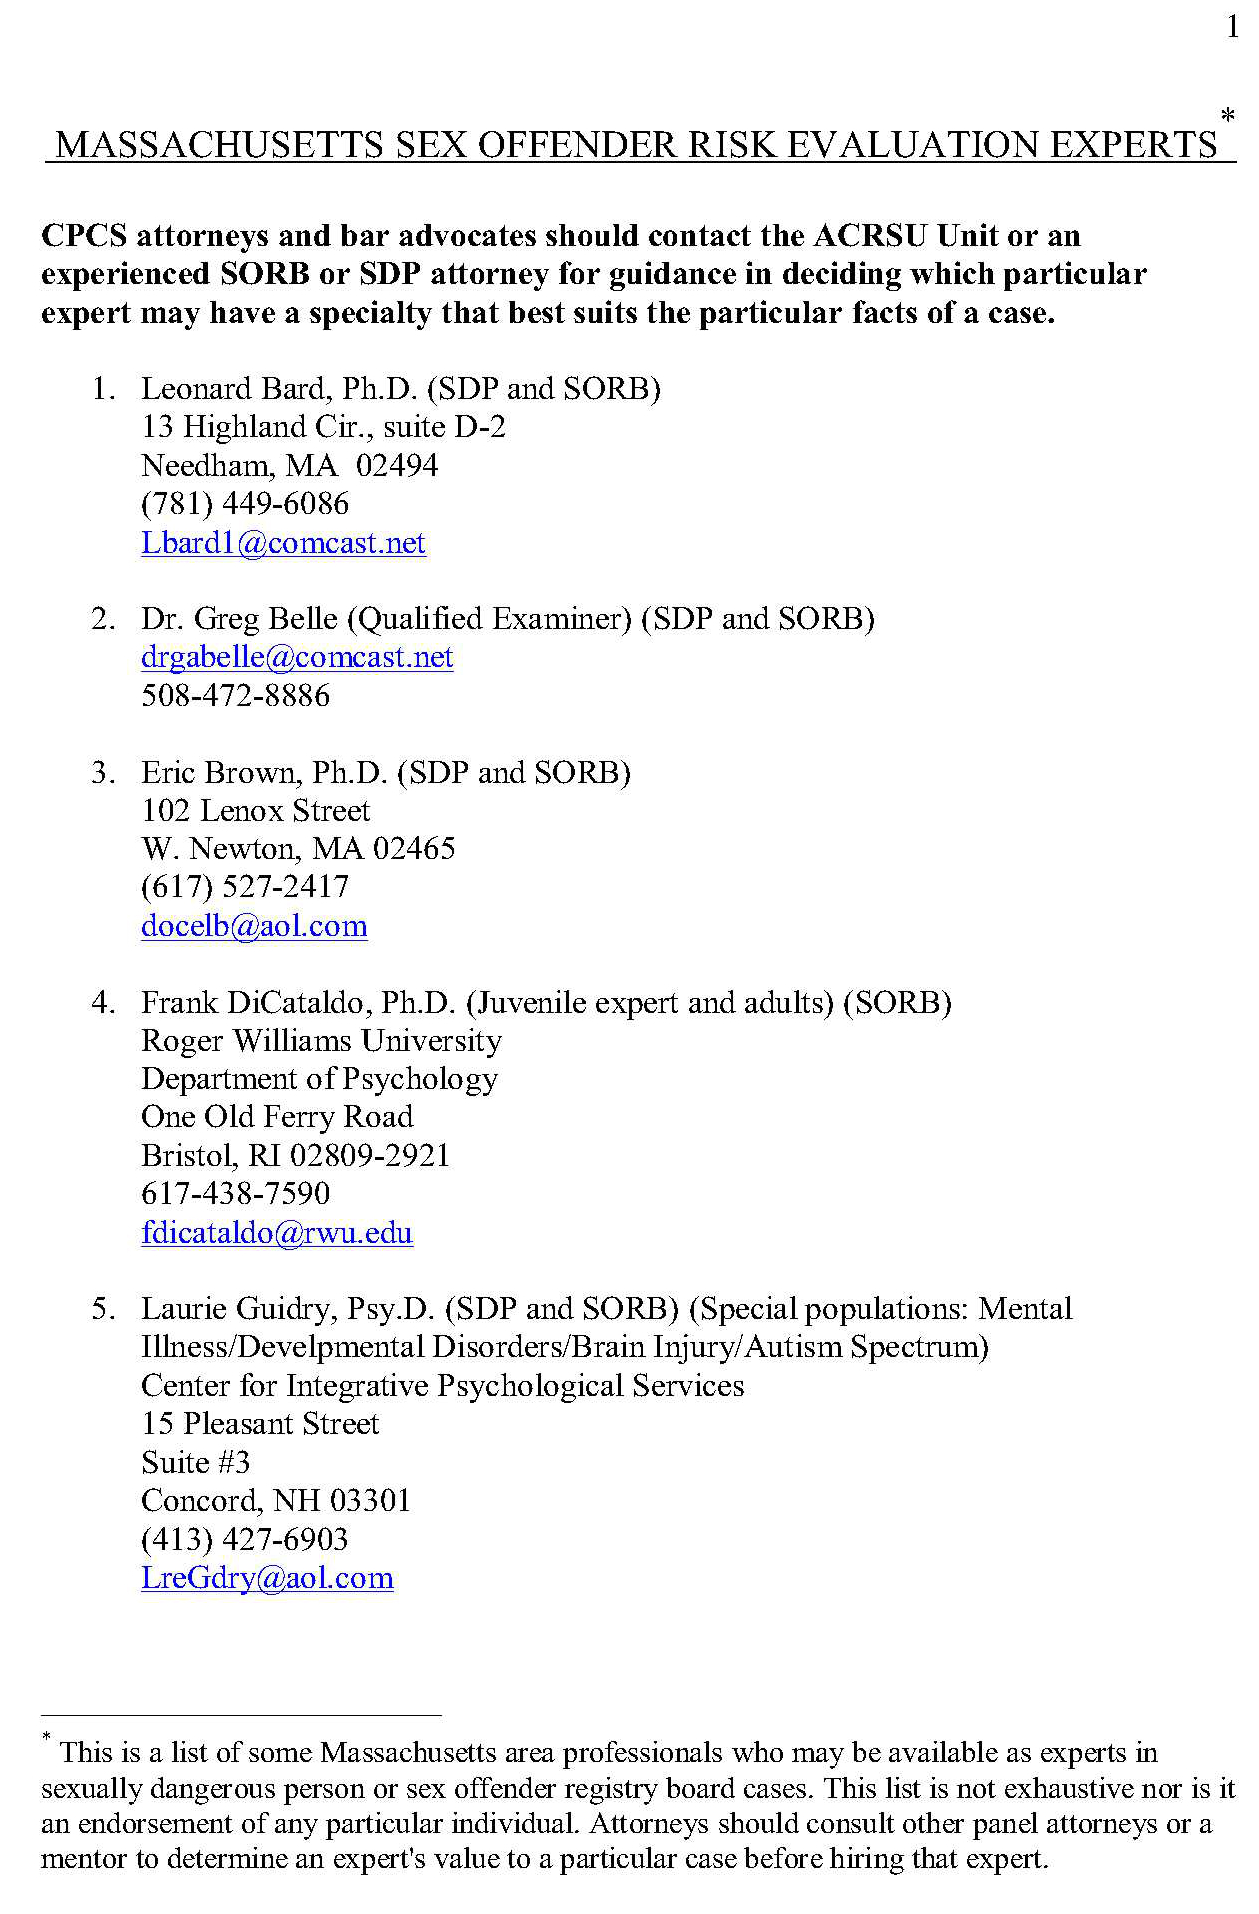 List of Sex Offender Risk Evaluation Experts.Updated Oct. 2014_1